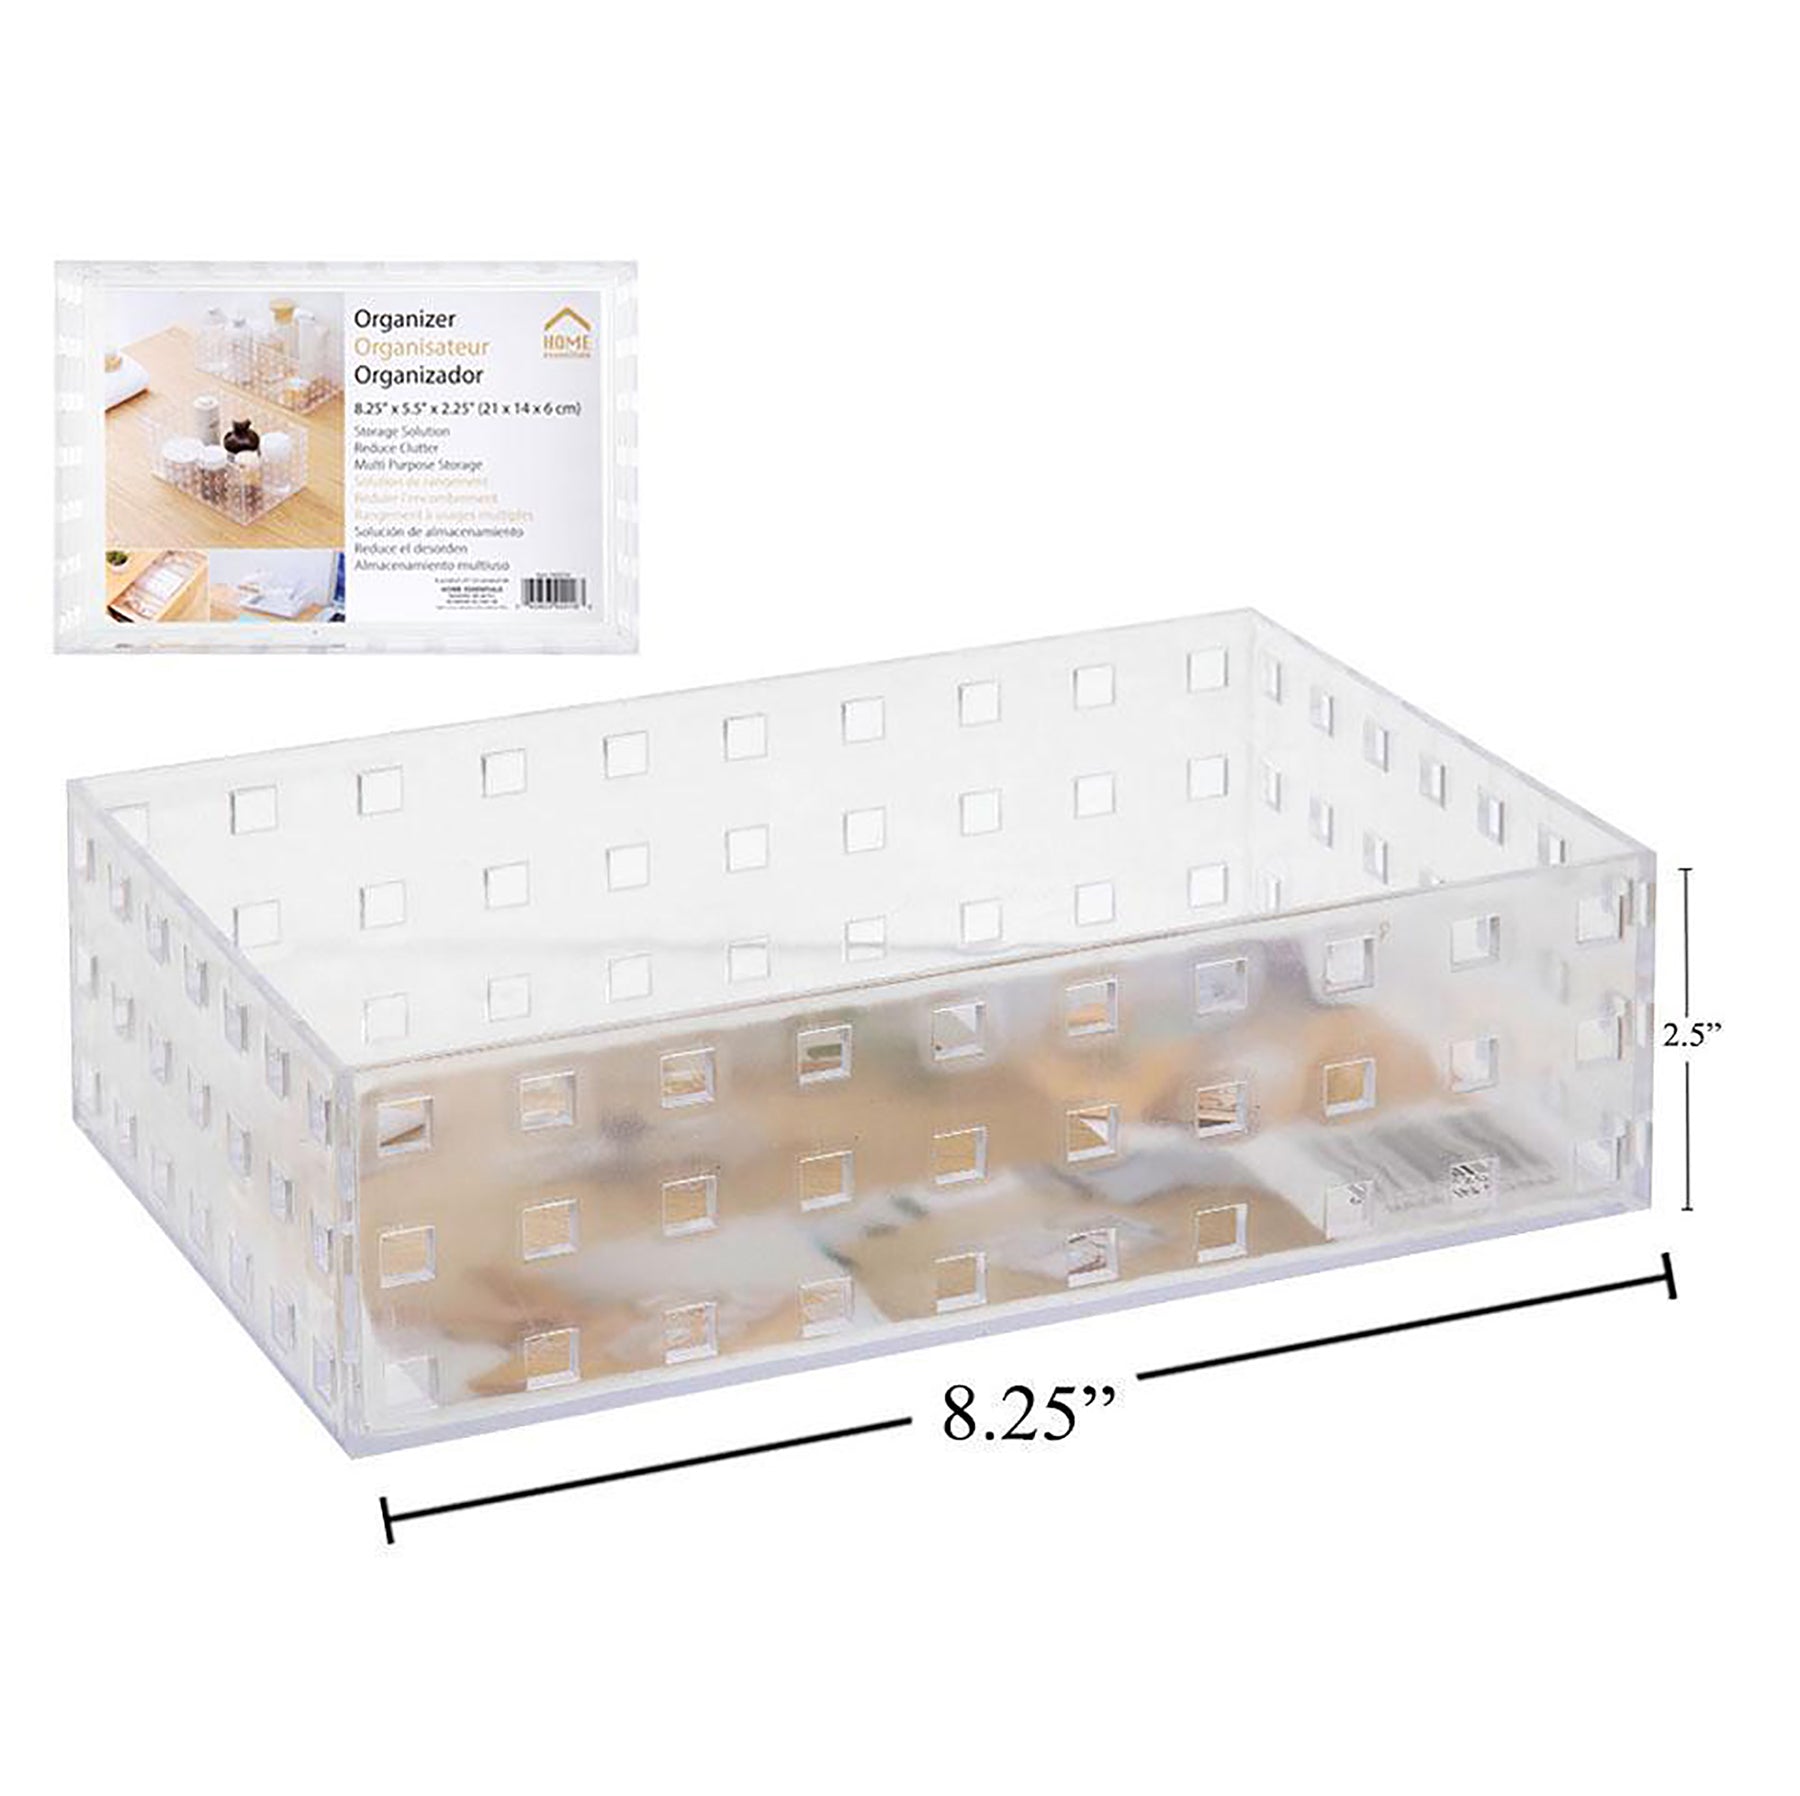 Home Essentials Organize Basket Rectangular Frosted Plastic 8.25x5.5x2.5in